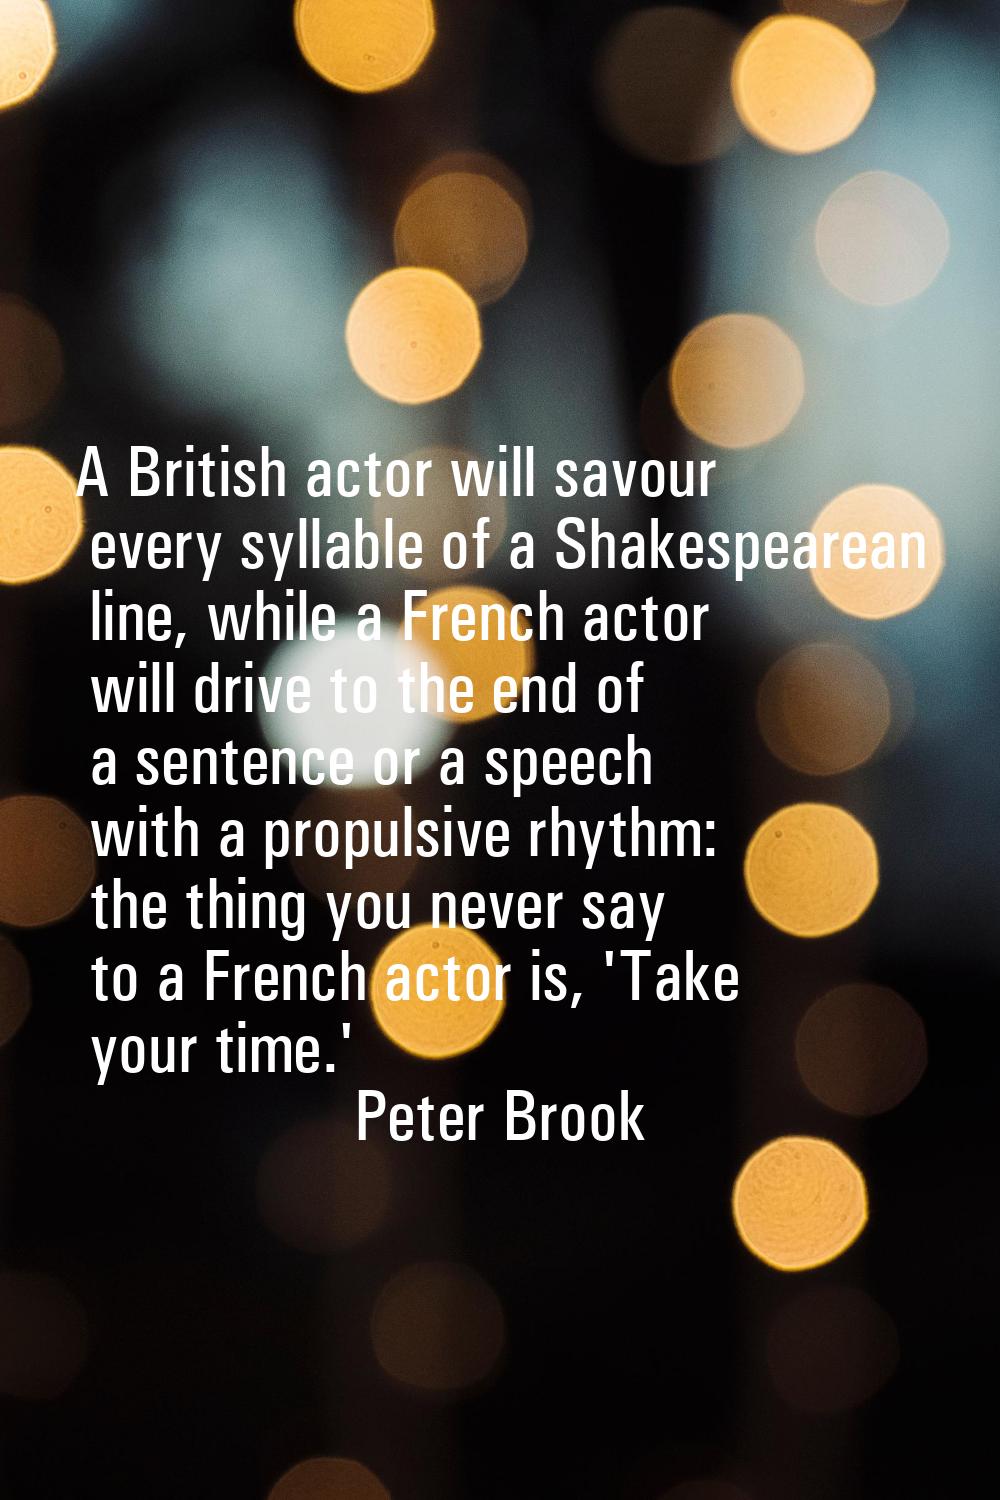 A British actor will savour every syllable of a Shakespearean line, while a French actor will drive